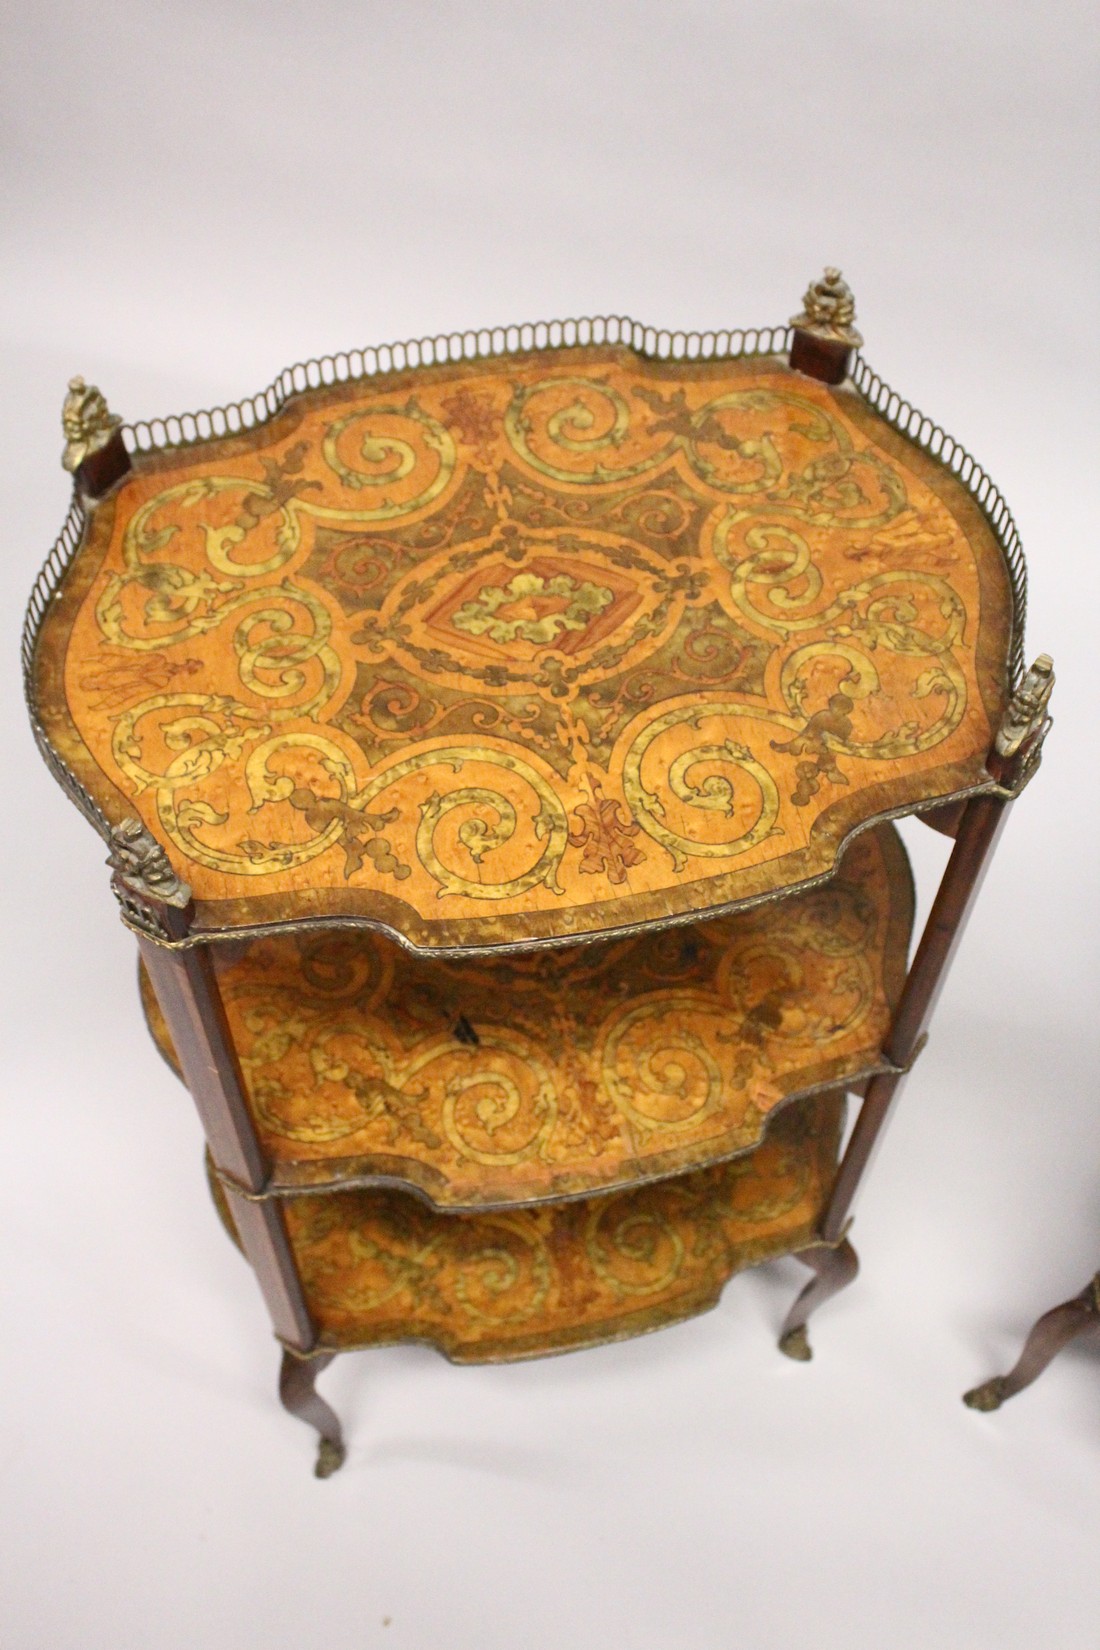 A PAIR OF EARLY 20TH CENTURY FRENCH MARQUETRY AND ORMOLU MOUNTED THREE TIER ETAGERES, with galleried - Image 2 of 4